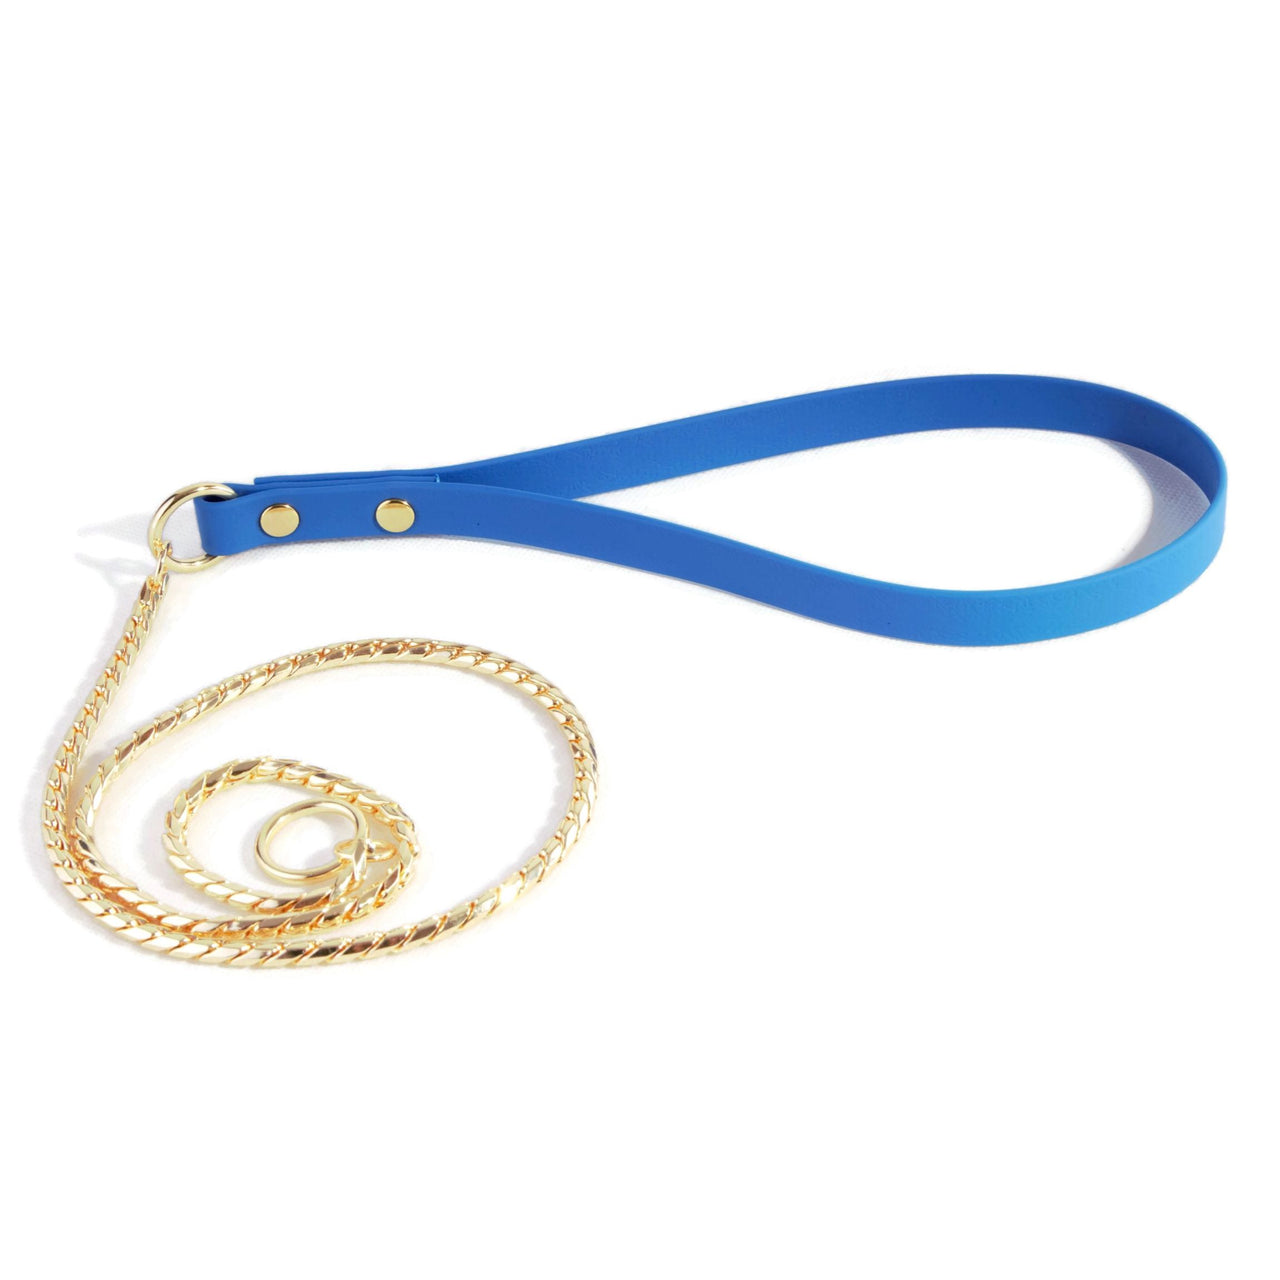 Gold Snake Show Lead Blue